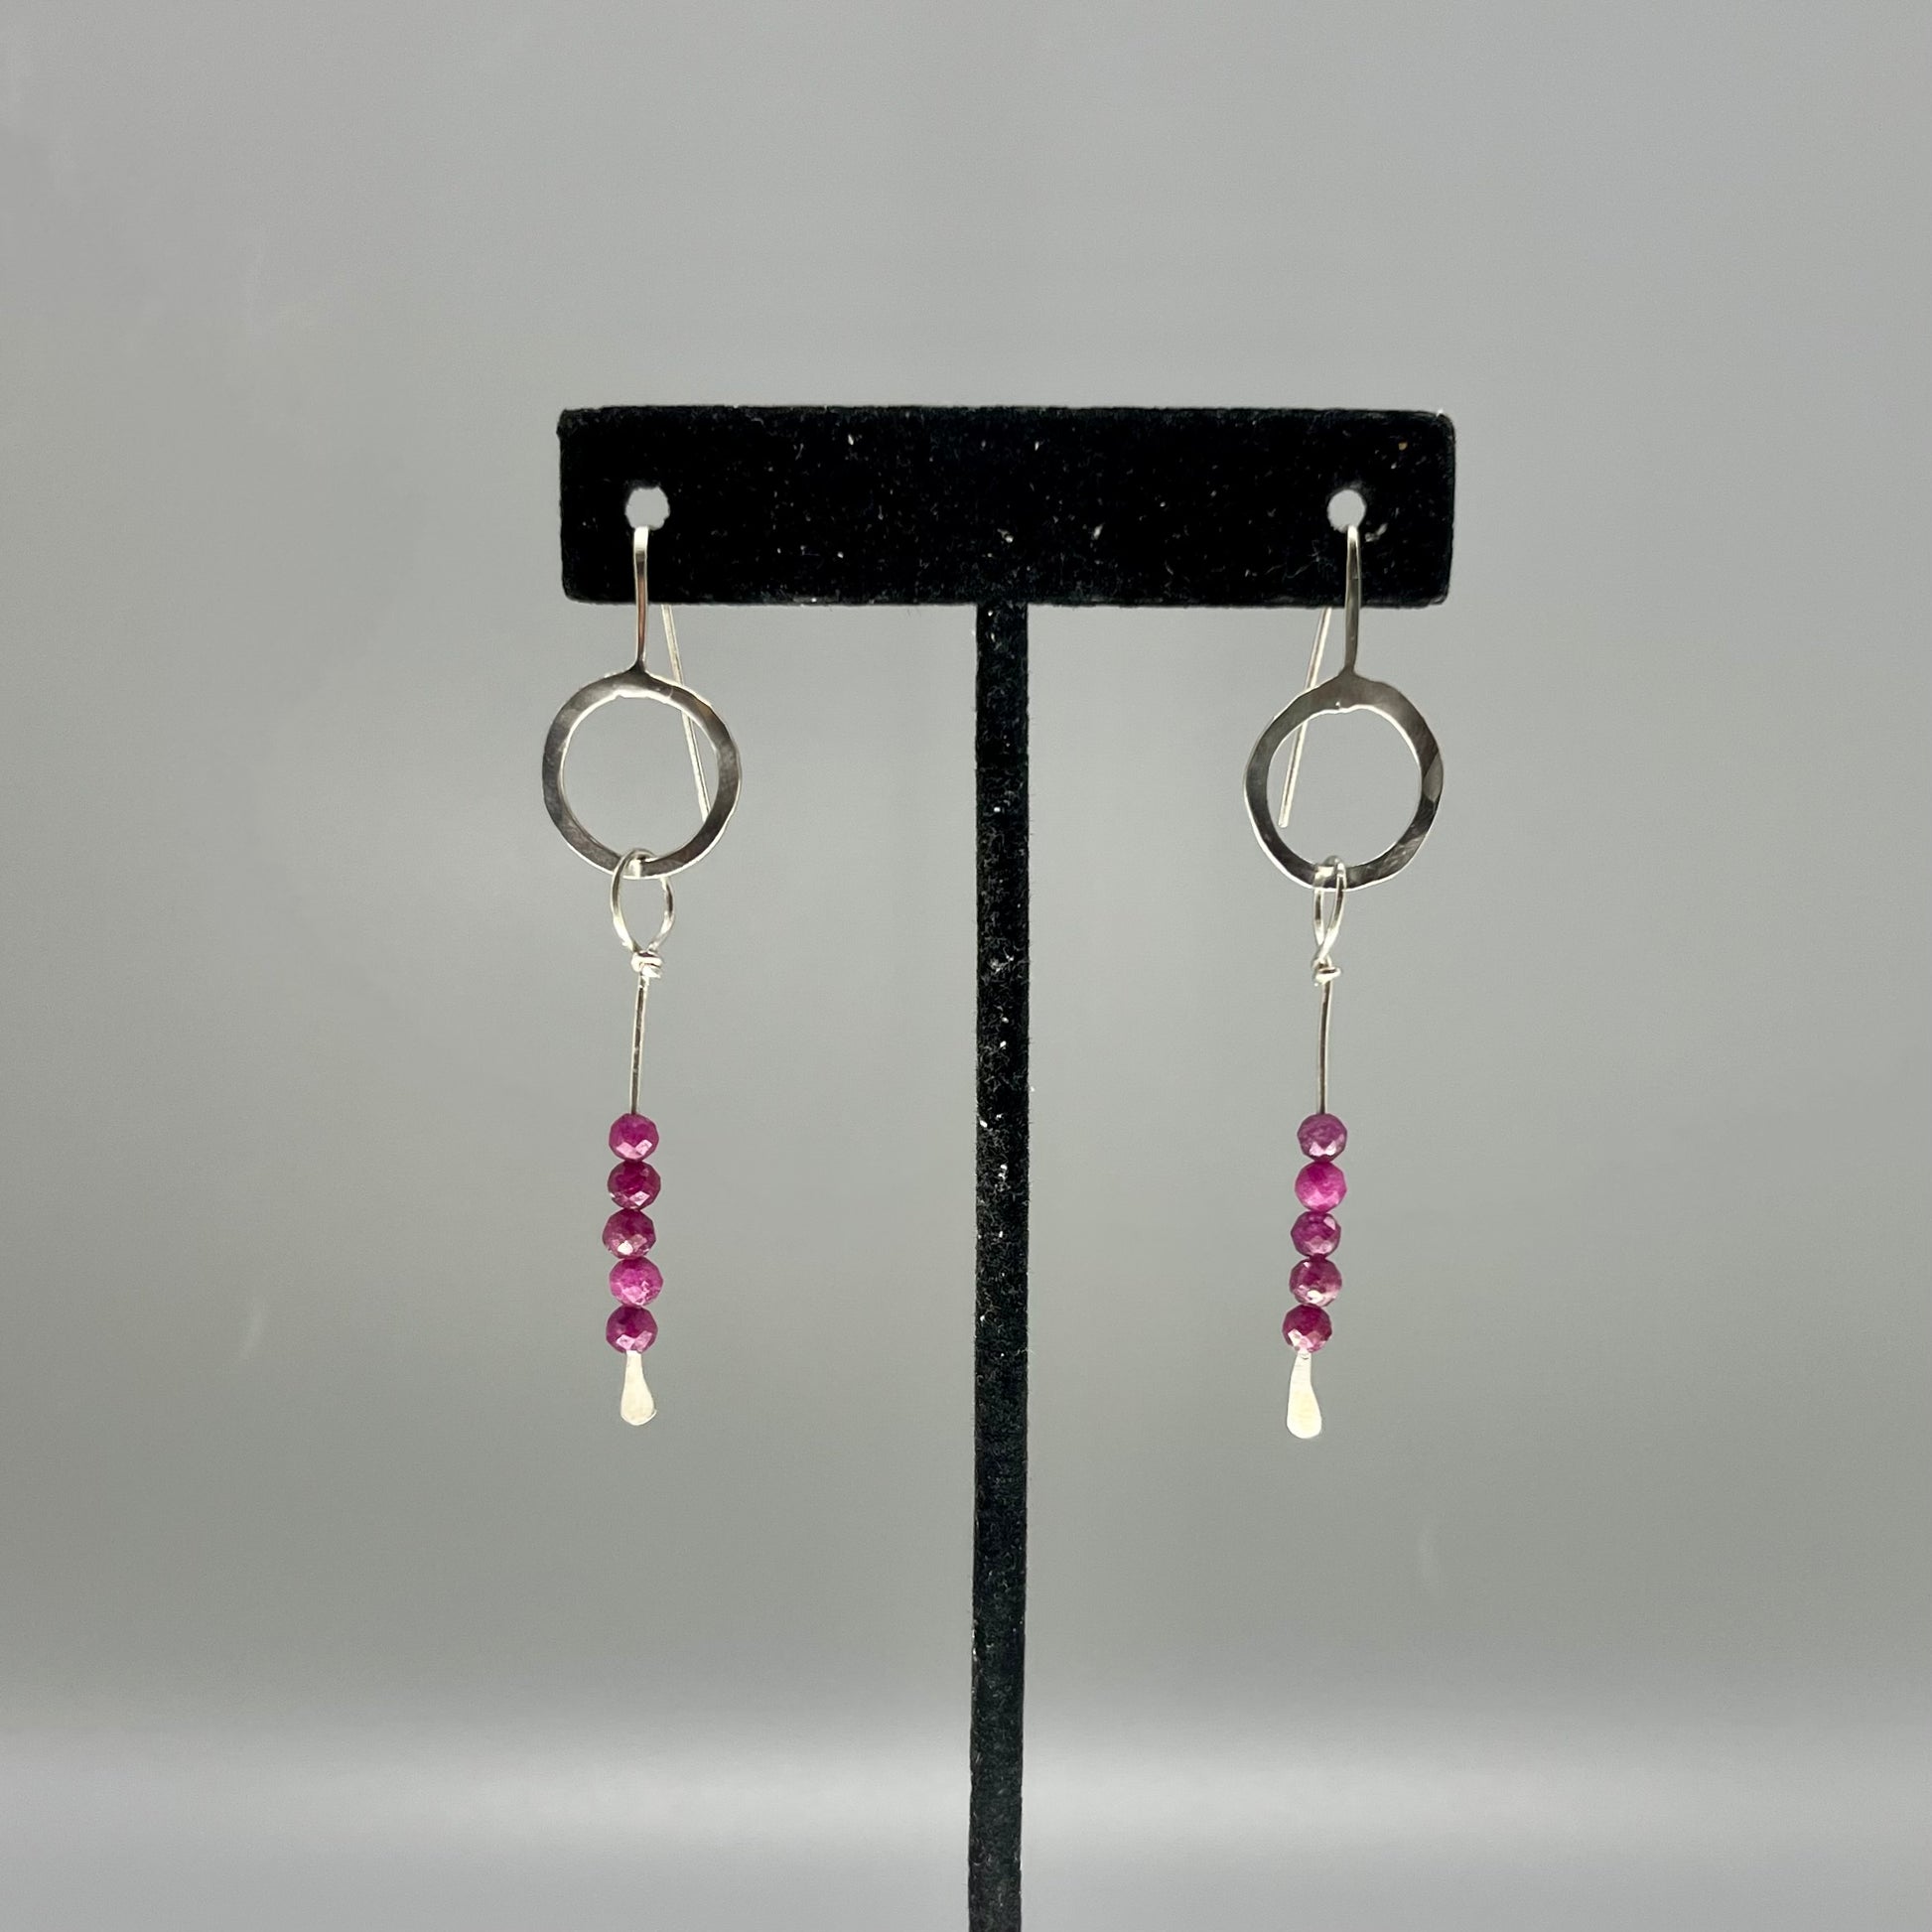 Sterling silver dangle earrings consisting of a hoop of silver and a dangle with 5 rubies 3mm each. Rocking Glass Studio